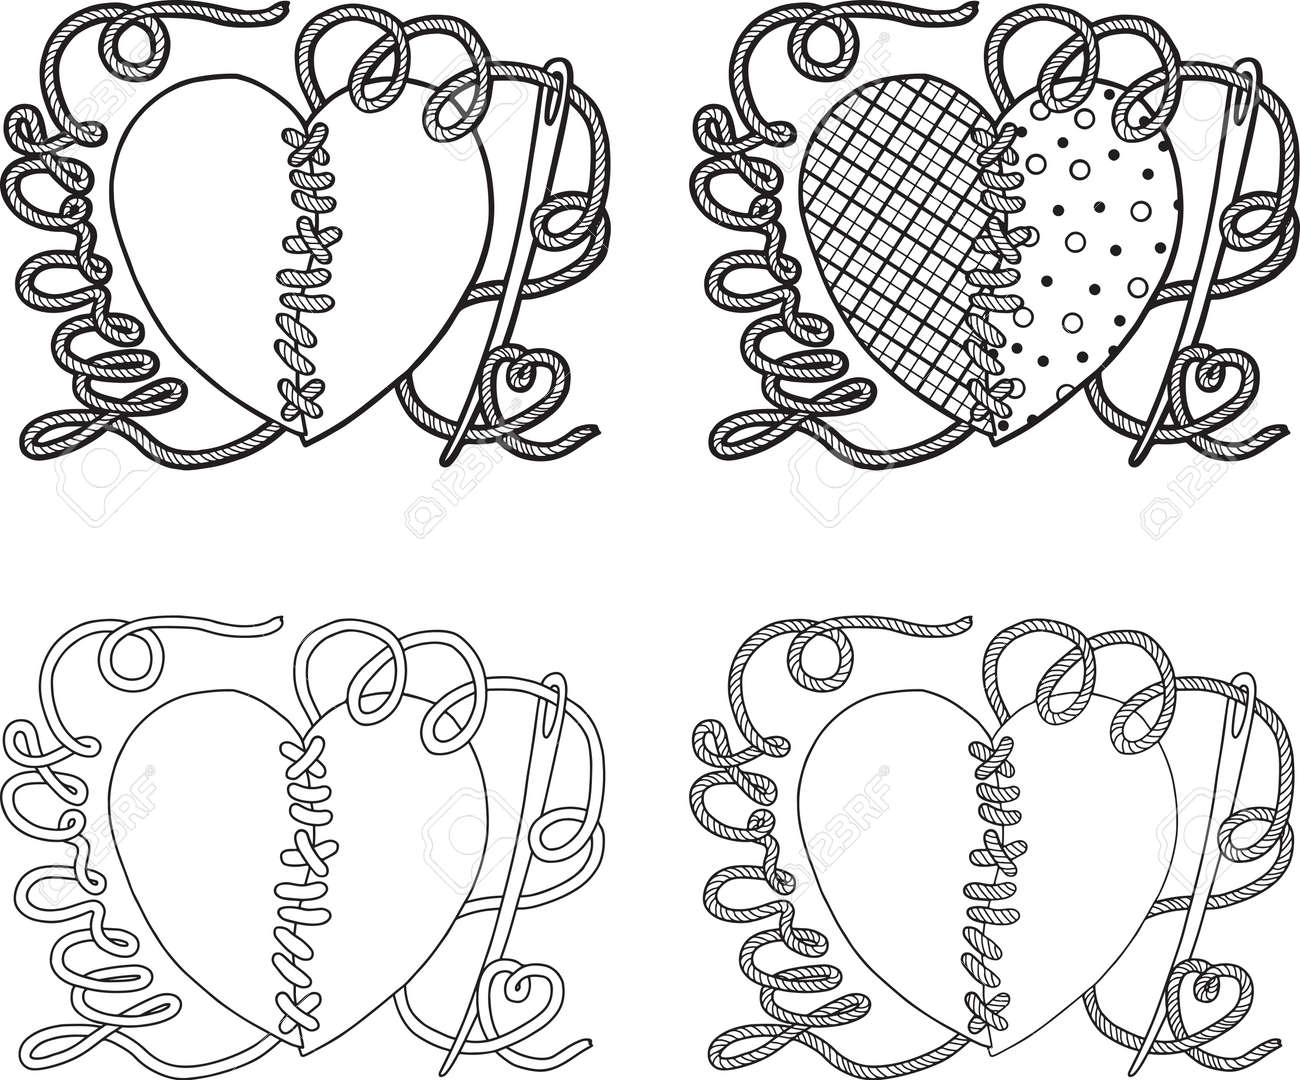 Heart broken valentines day coloring book page for adults broken heart sew with a needle royalty free svg cliparts vectors and stock illustration image